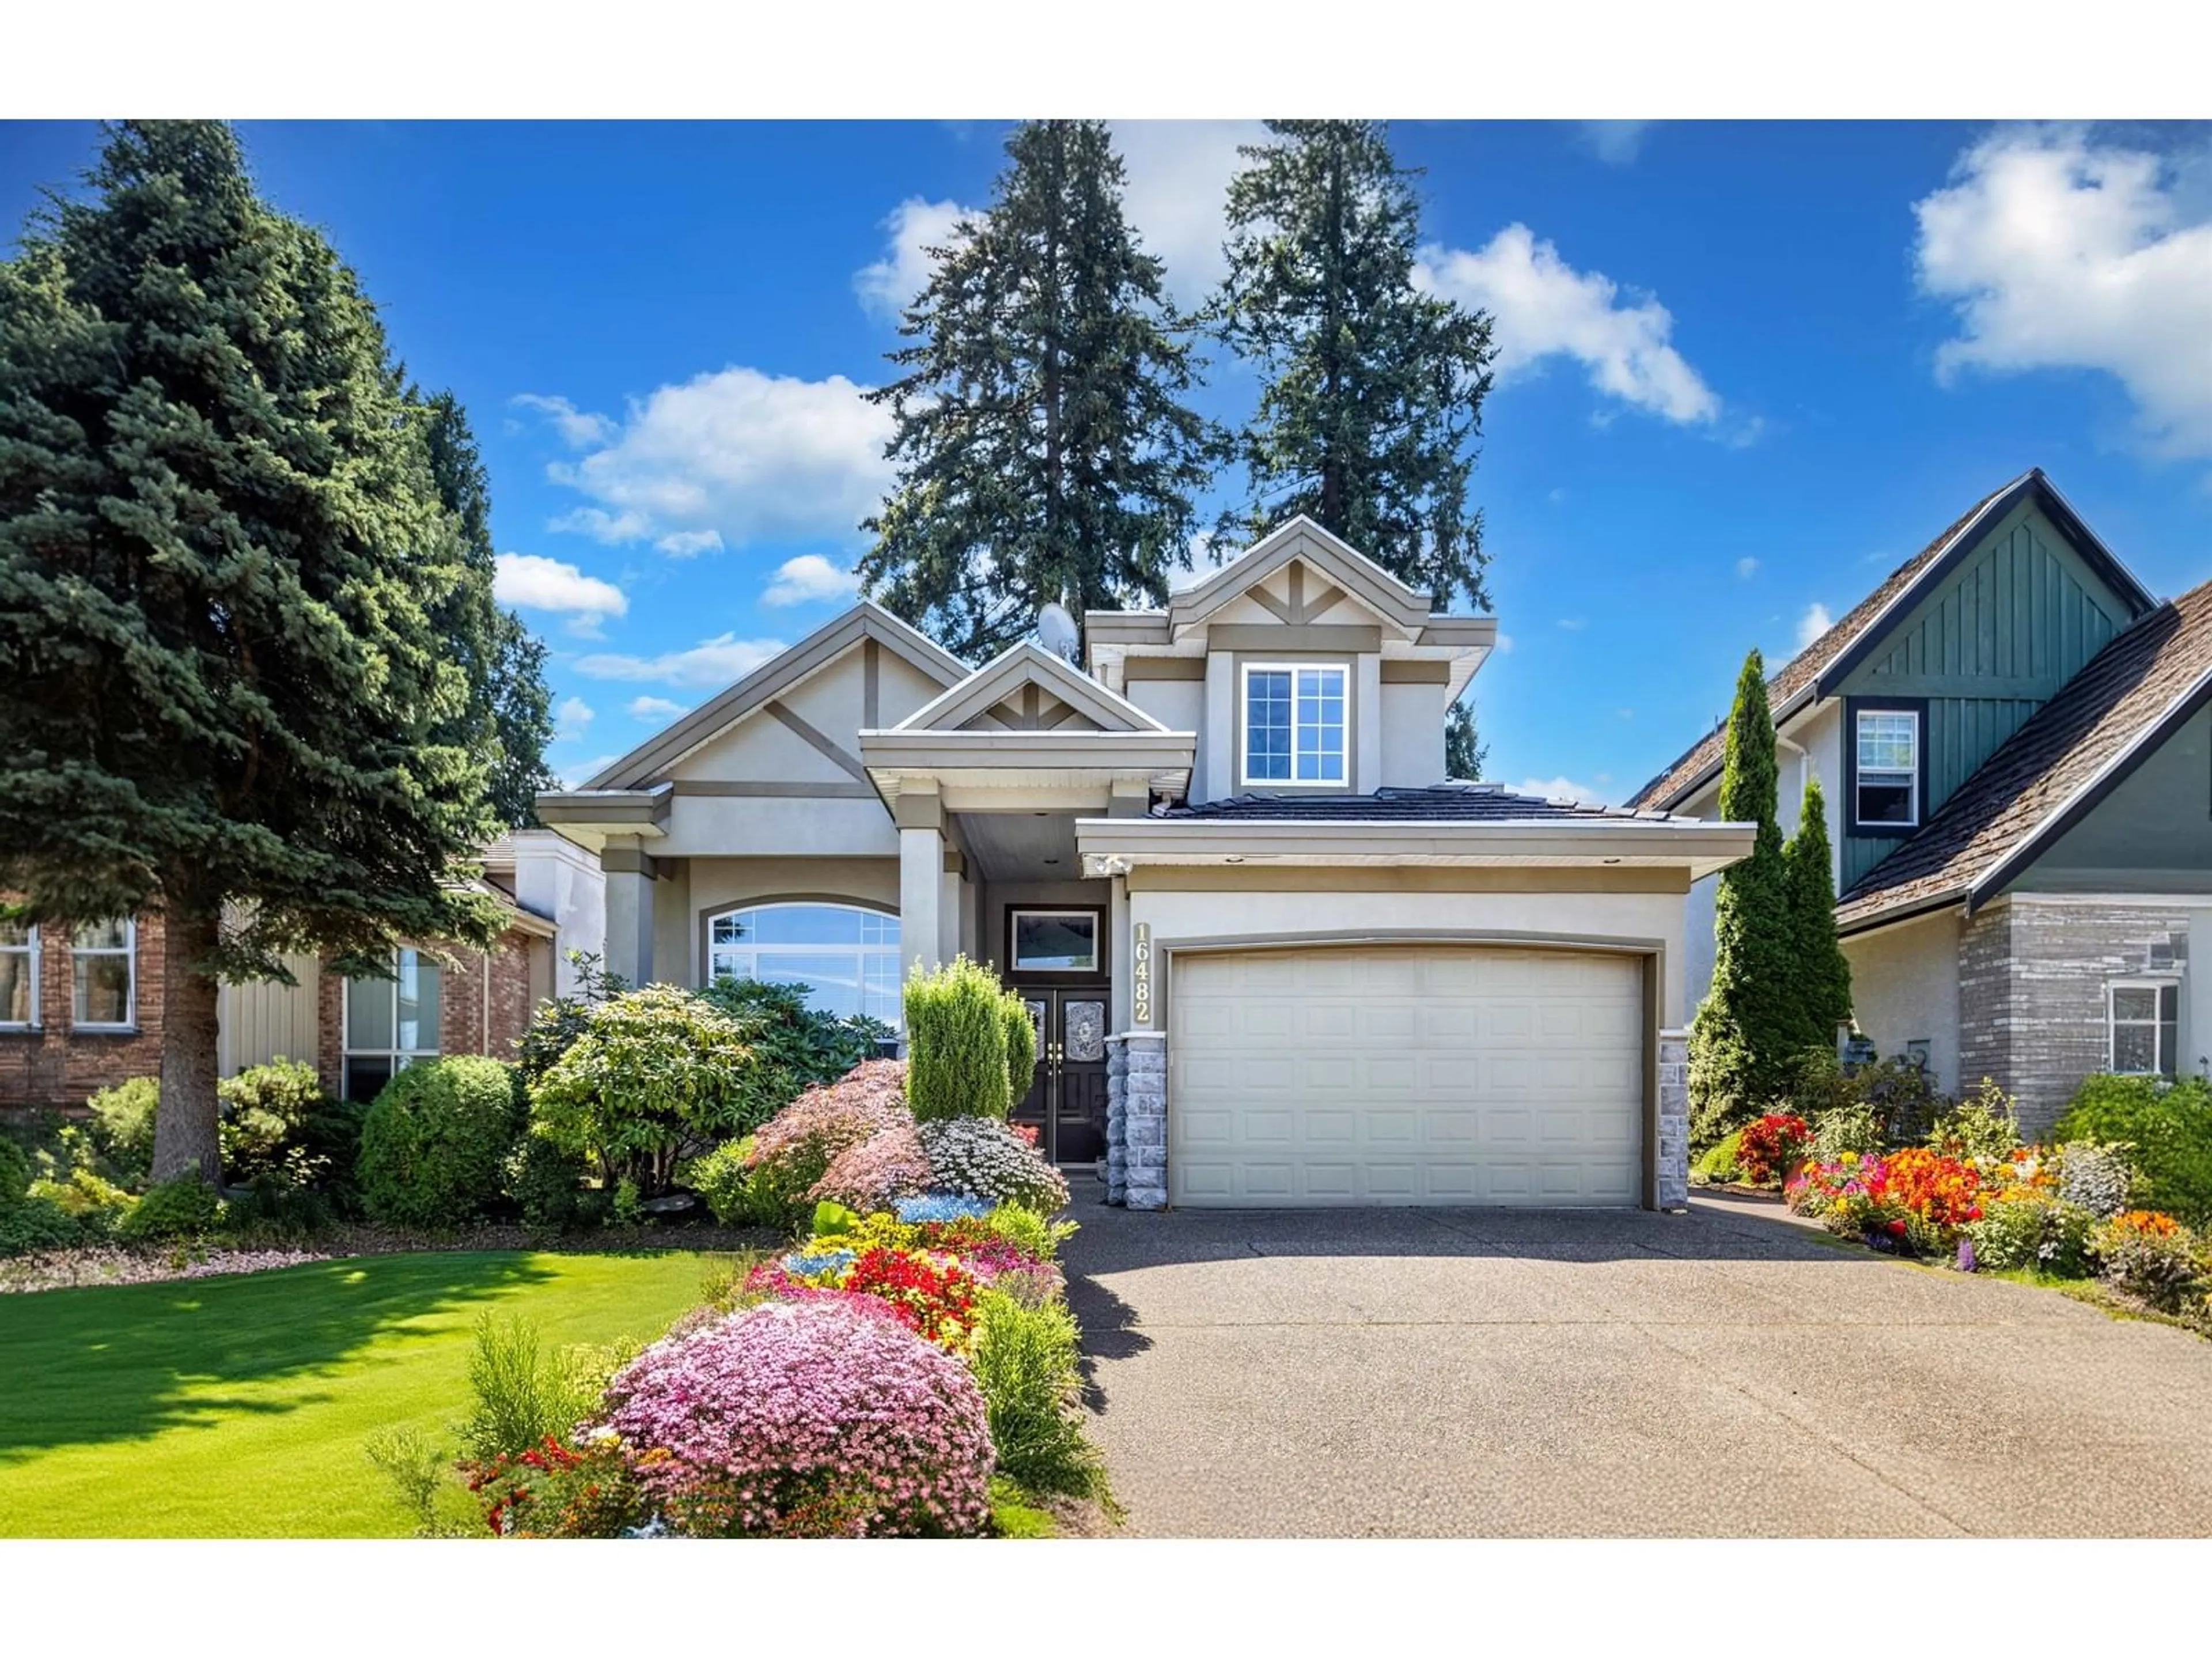 Frontside or backside of a home for 16482 108A AVENUE, Surrey British Columbia V4N5B9